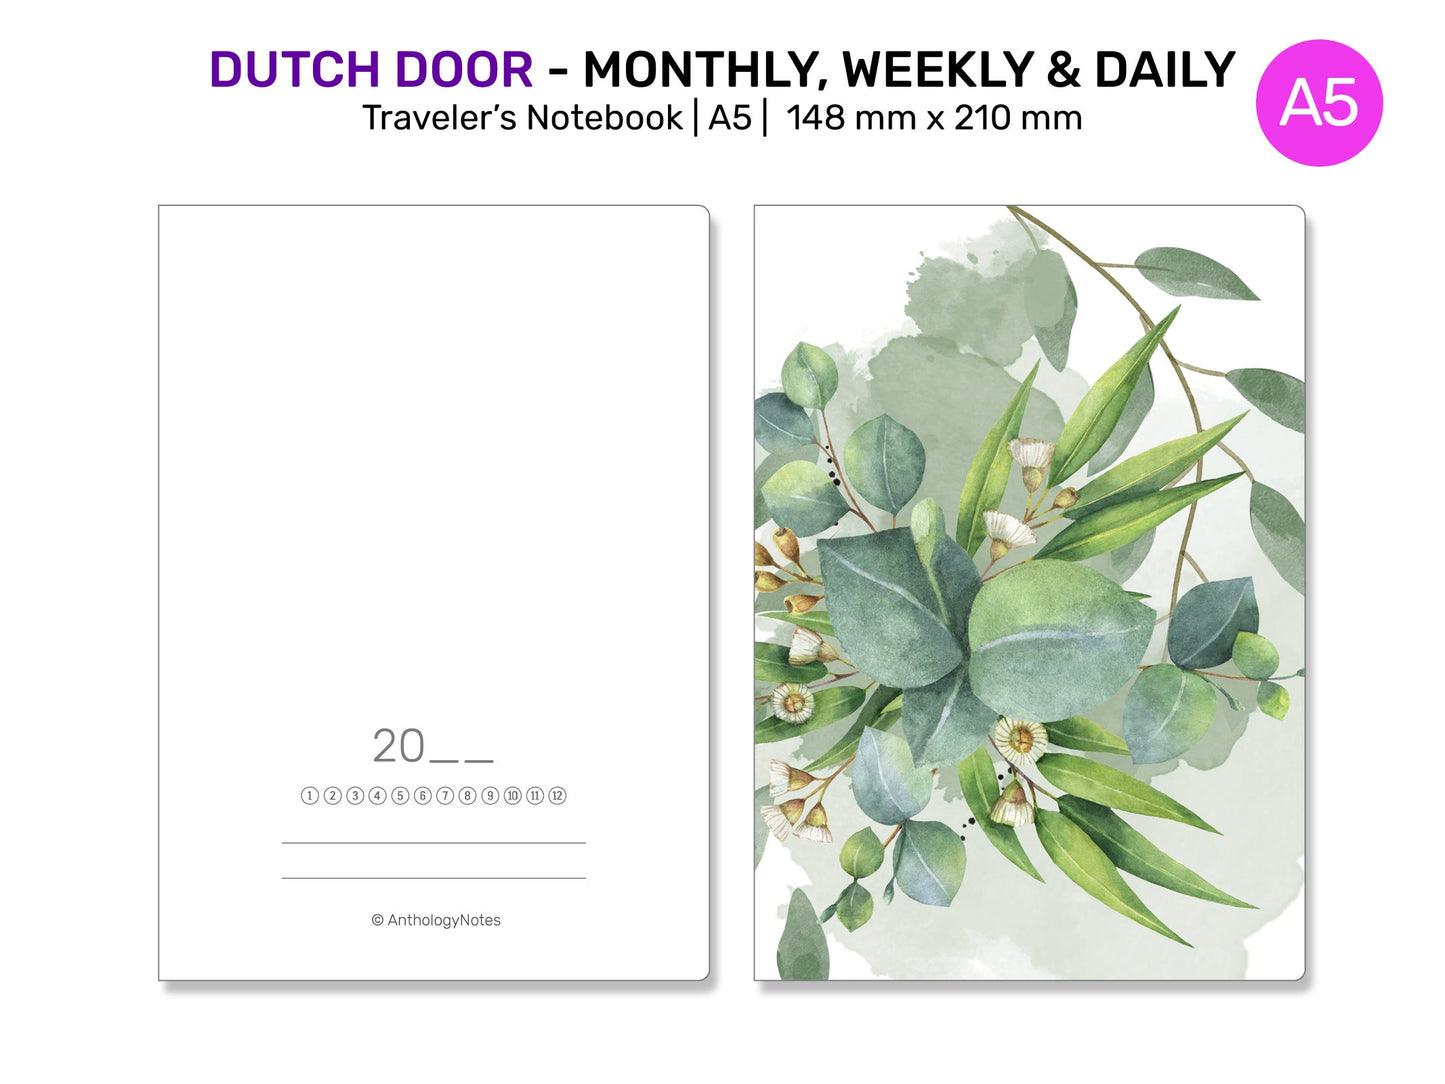 A5 TN Dutch Door Style Traveler's Notebook Printable Insert Daily, Weekly, Monthly Grid Minimalist DD-A5001